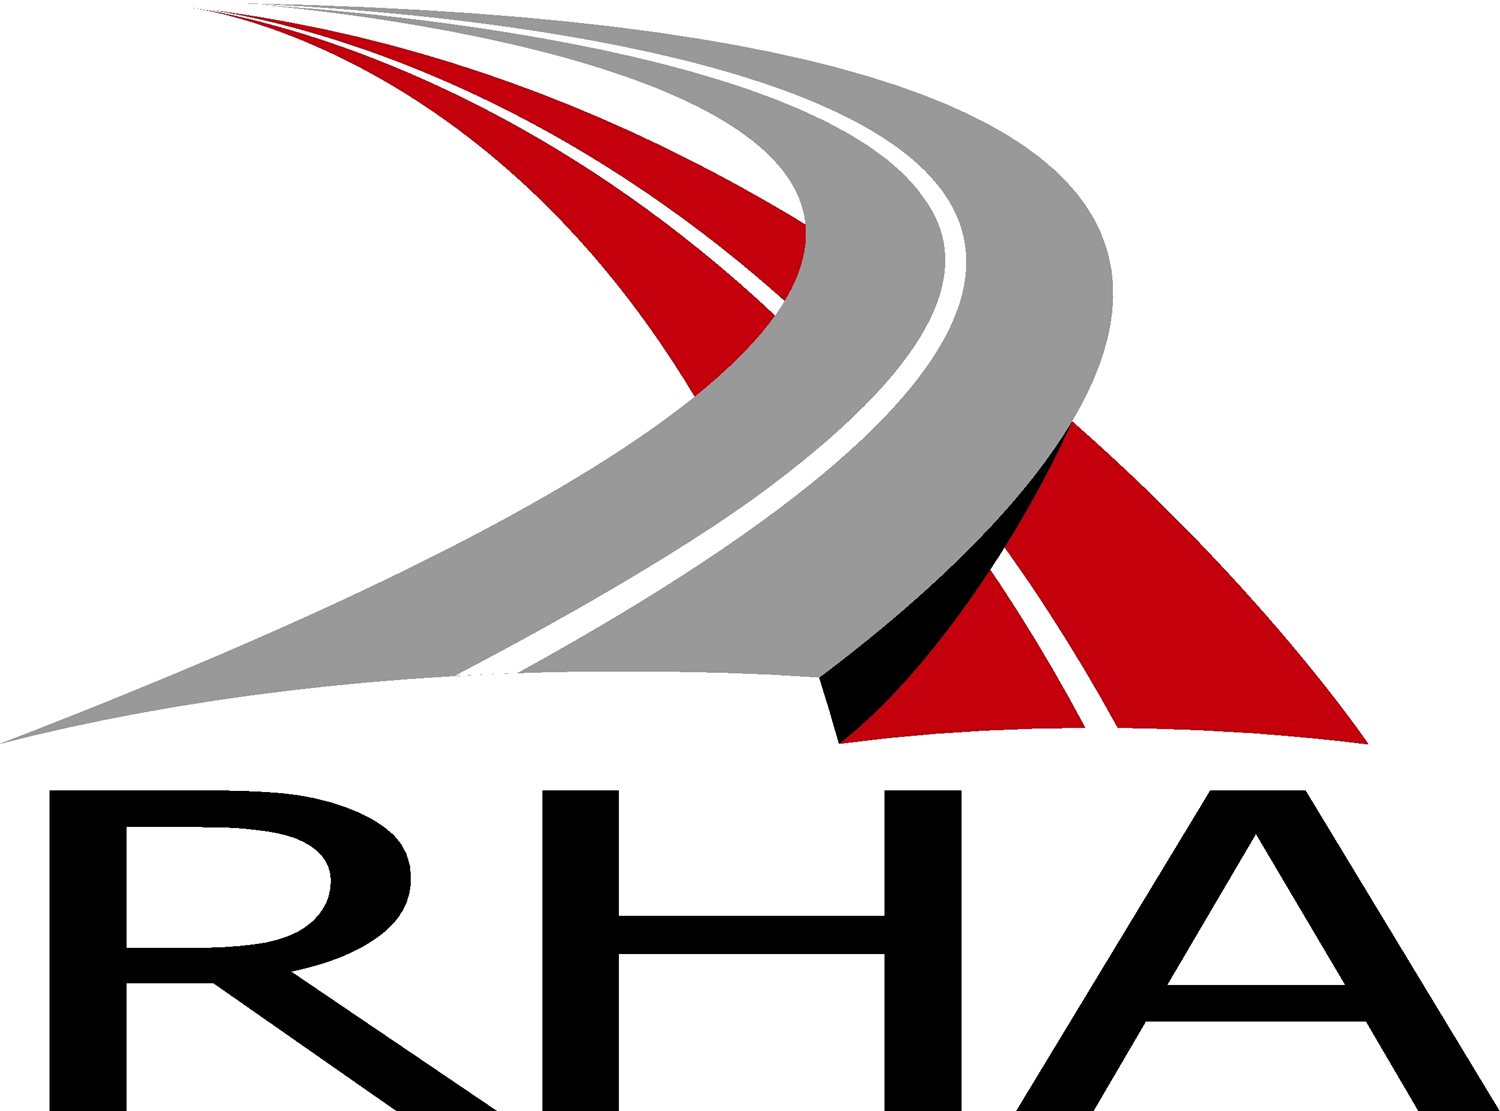 Brexit plans ‘will add administrative cost’ to UK operators, says RHA